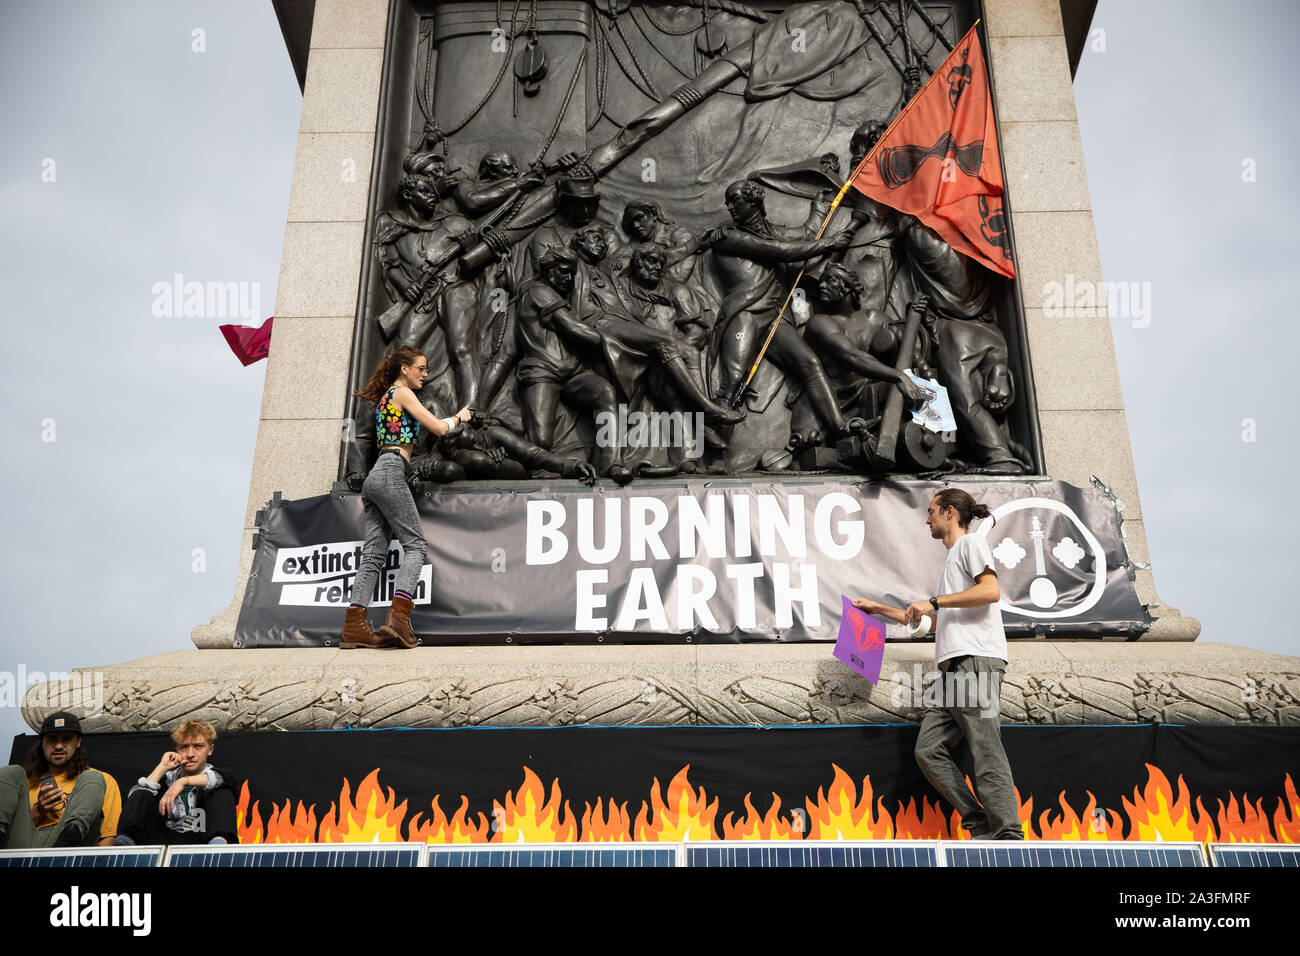 Protesters during an Extinction Rebellion (XR) protest in Trafalgar Square, London. Stock Photo